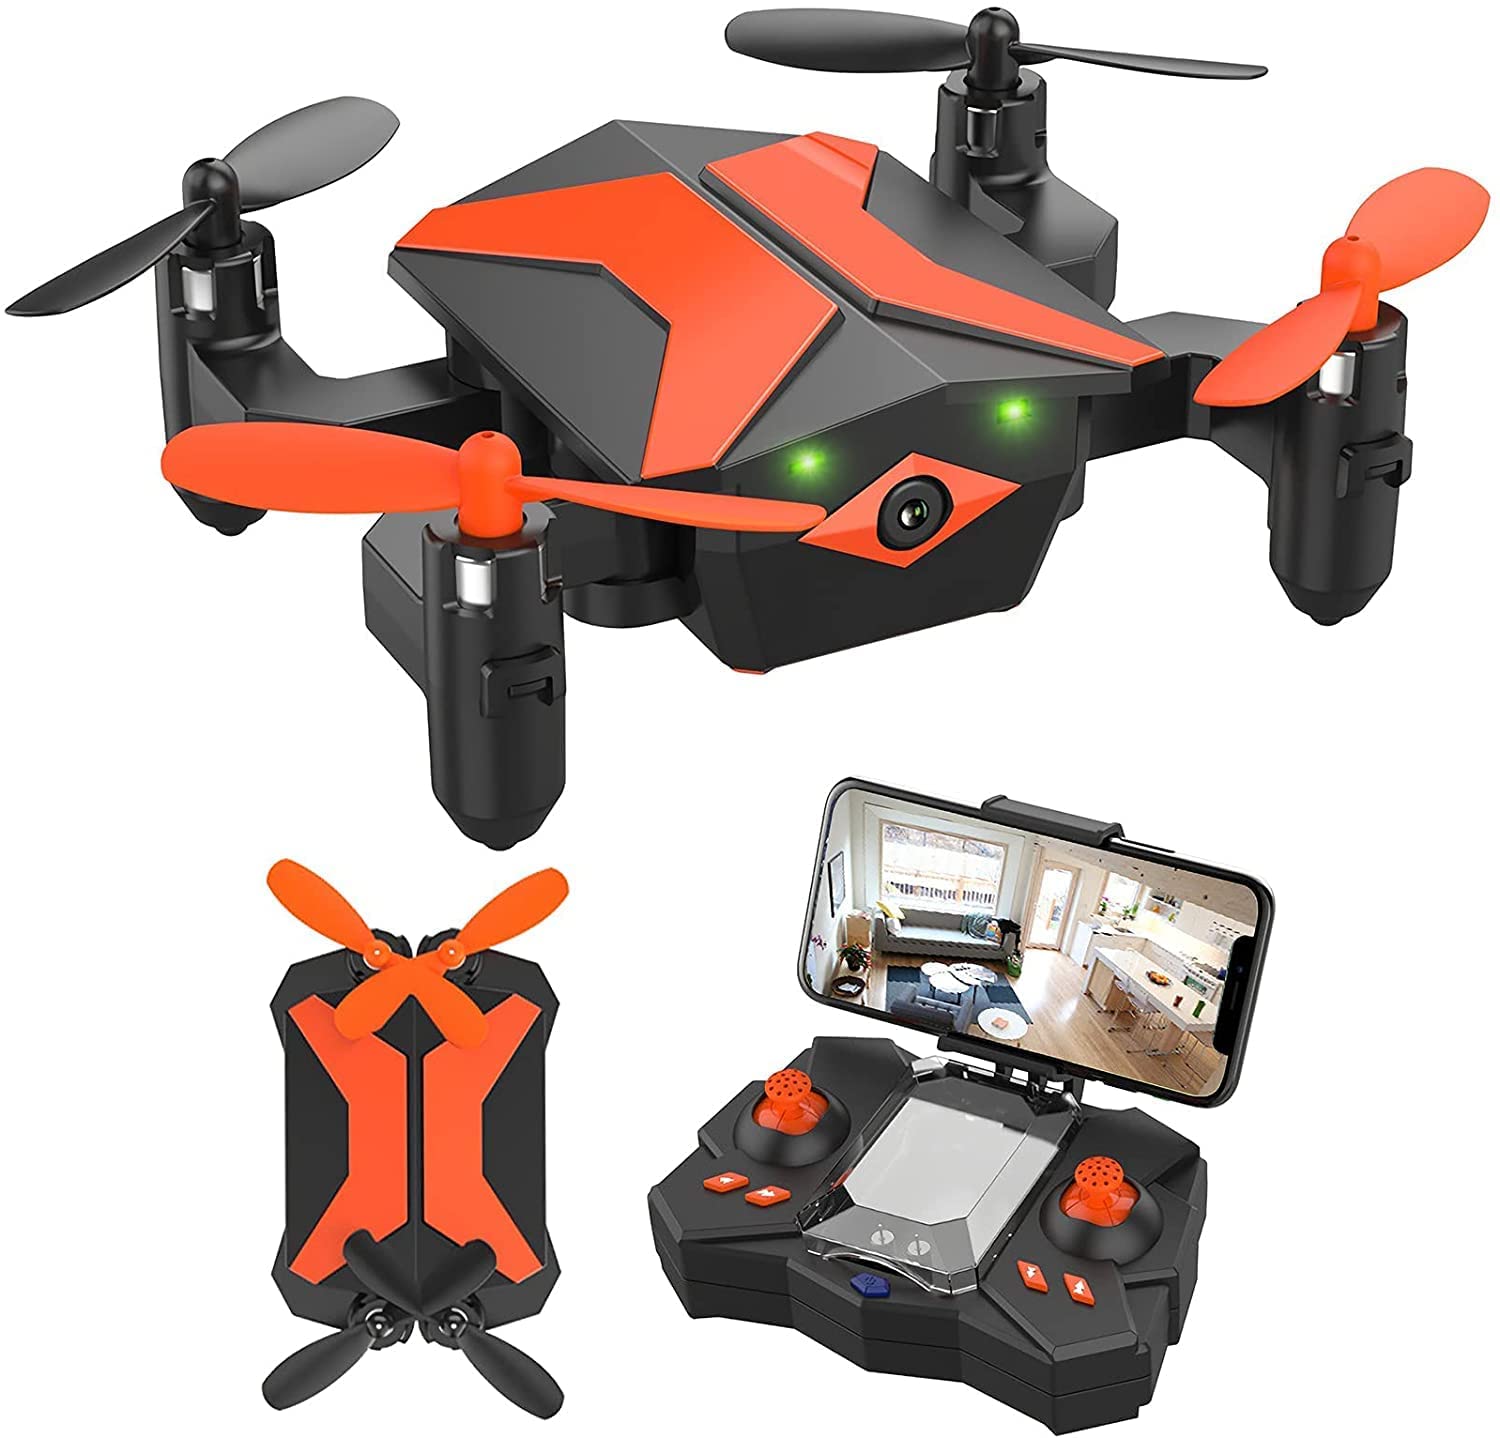 Drone with Camera Drones for Kids Beginners, RC Quadcopter with App FPV Video, Voice Control, Altitude Hold, Headless Mode, Trajectory Flight, Foldable Kids Drone Boys Gifts Girls Toys-Light Orange